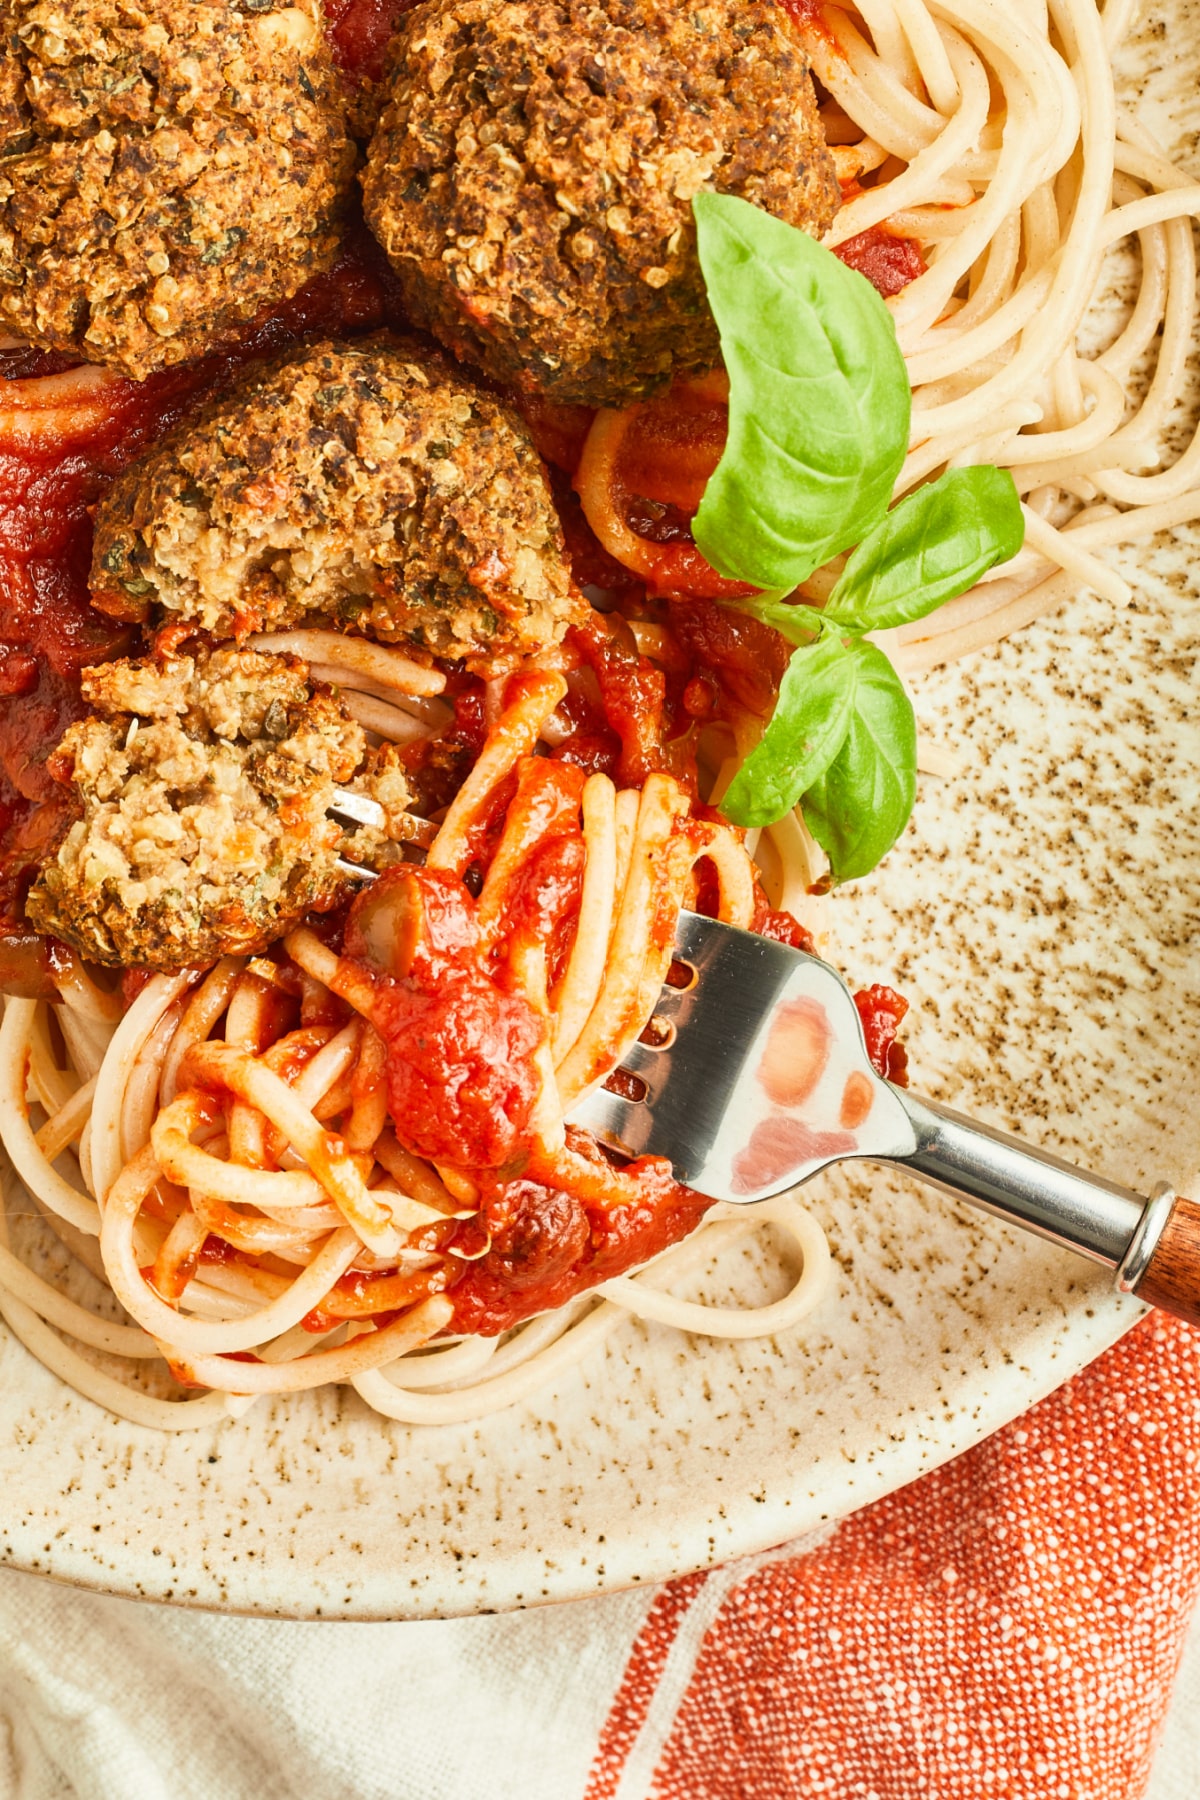 Overhead view of basil quinoa meatballs on spaghetti and marinara sauce. A fork has spaghetti noodles wrapped around it, and one meatball is sliced in half to show texture inside. Fresh basil garnishes the plate.